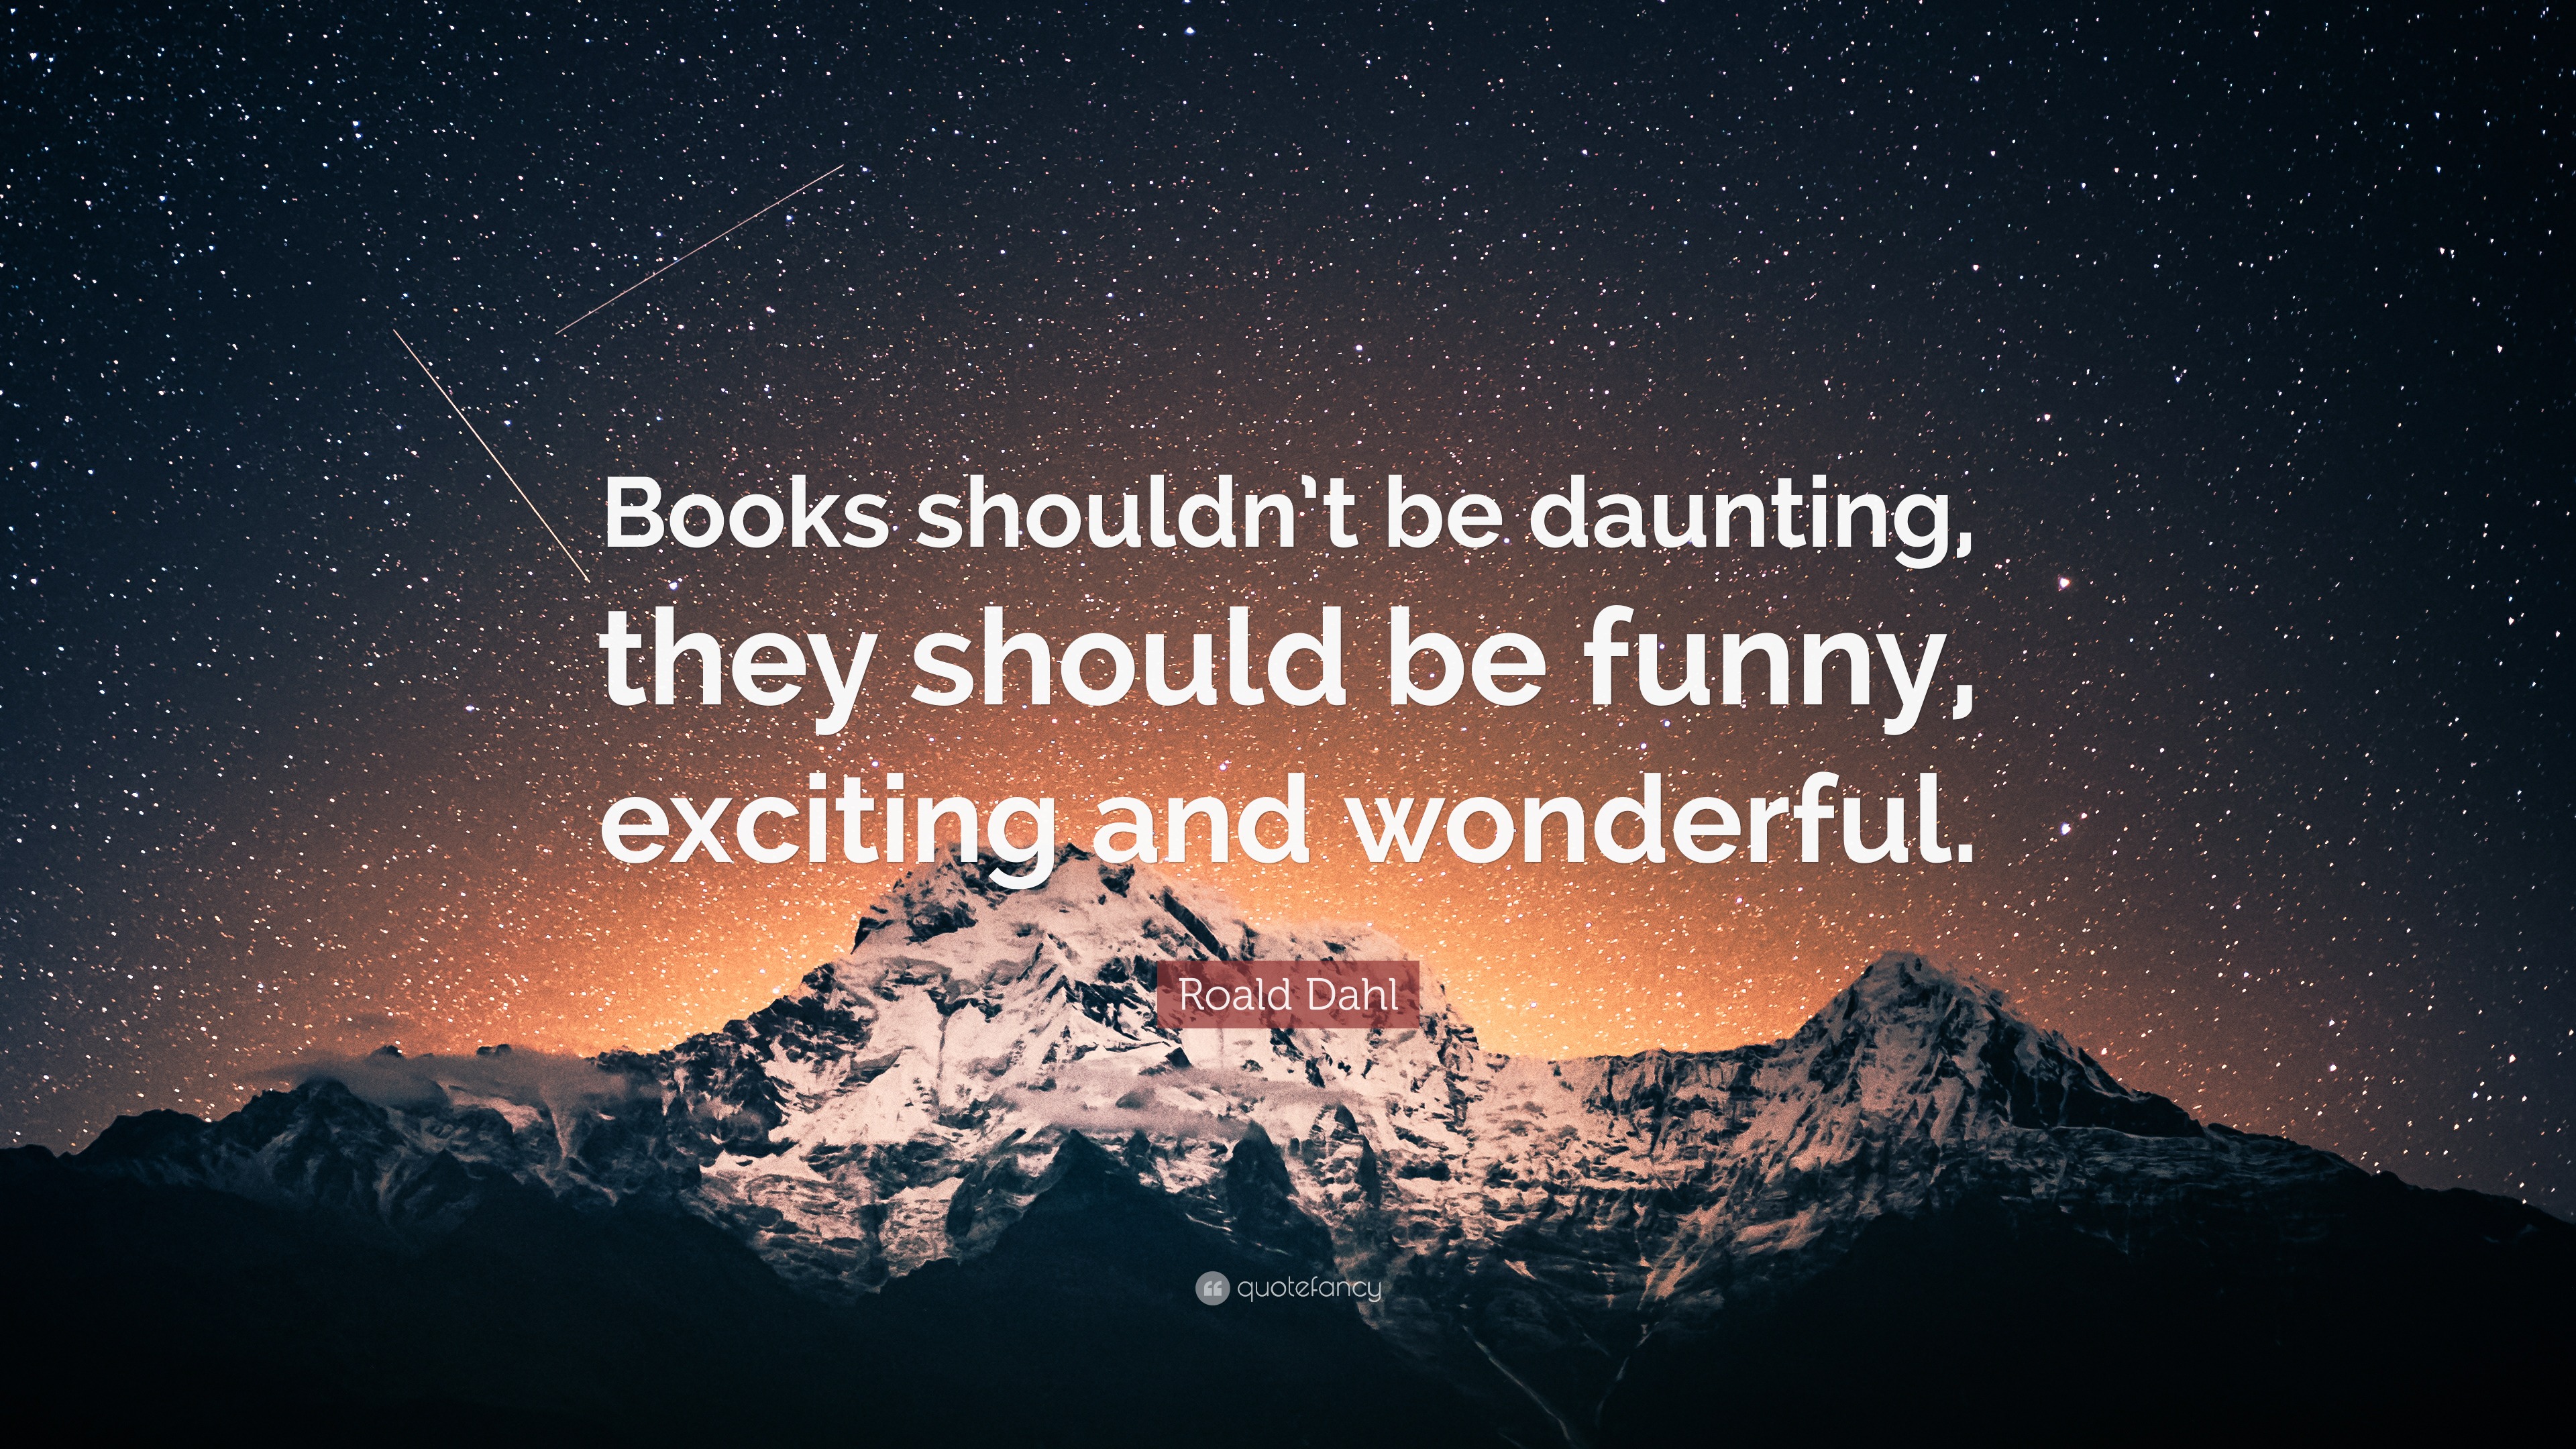 Roald Dahl Quote: “Books shouldn't be daunting, they should be funny,  exciting and wonderful.”